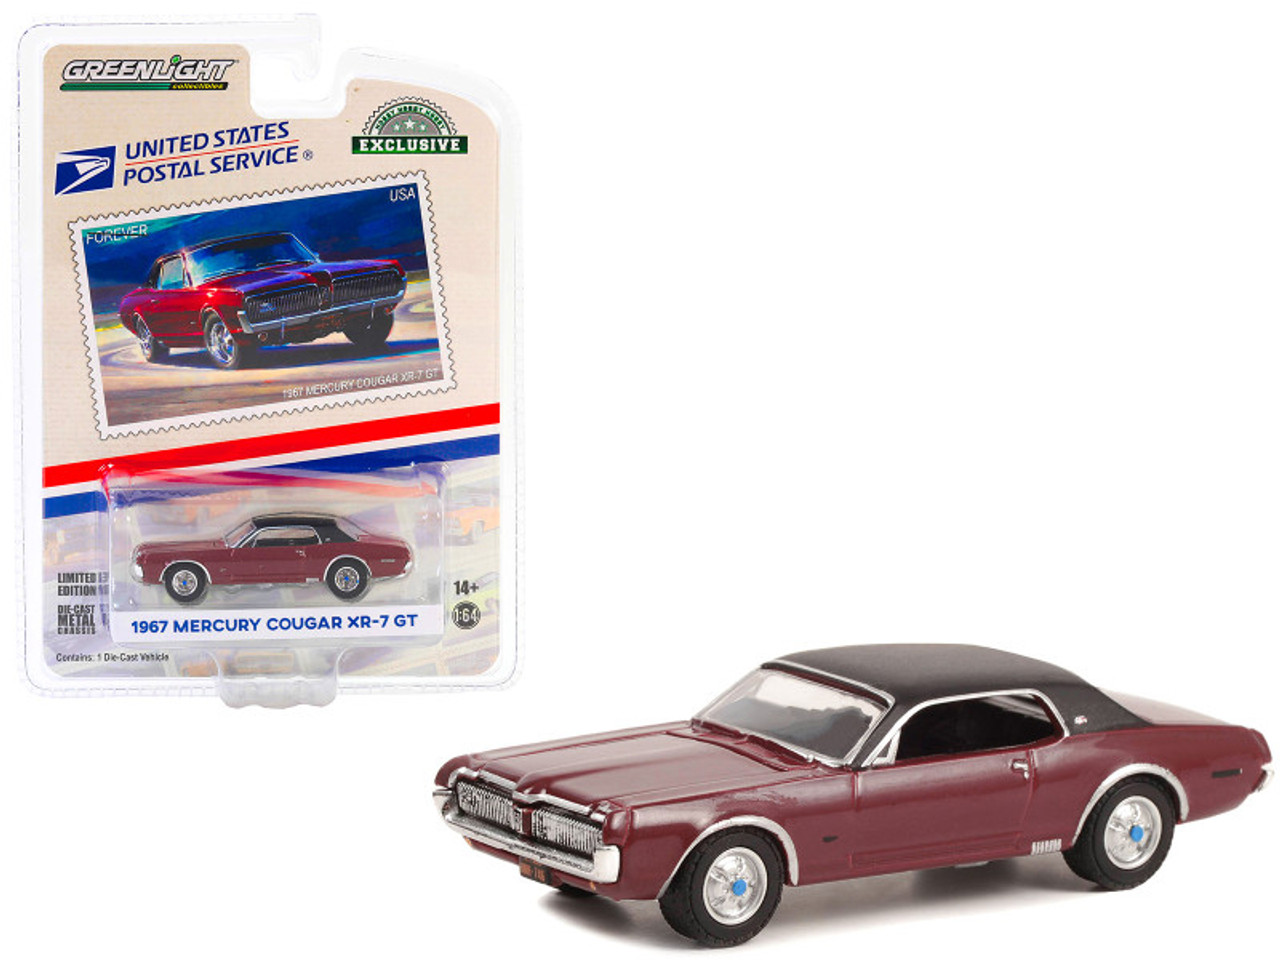 1967 Mercury Cougar XR-7 GT Dark Red with Black Top USPS (United States Postal Service) "2022 Pony Car Stamp Collection by Artist Tom Fritz" "Hobby Exclusive" Series 1/64 Diecast Model Car by Greenlight